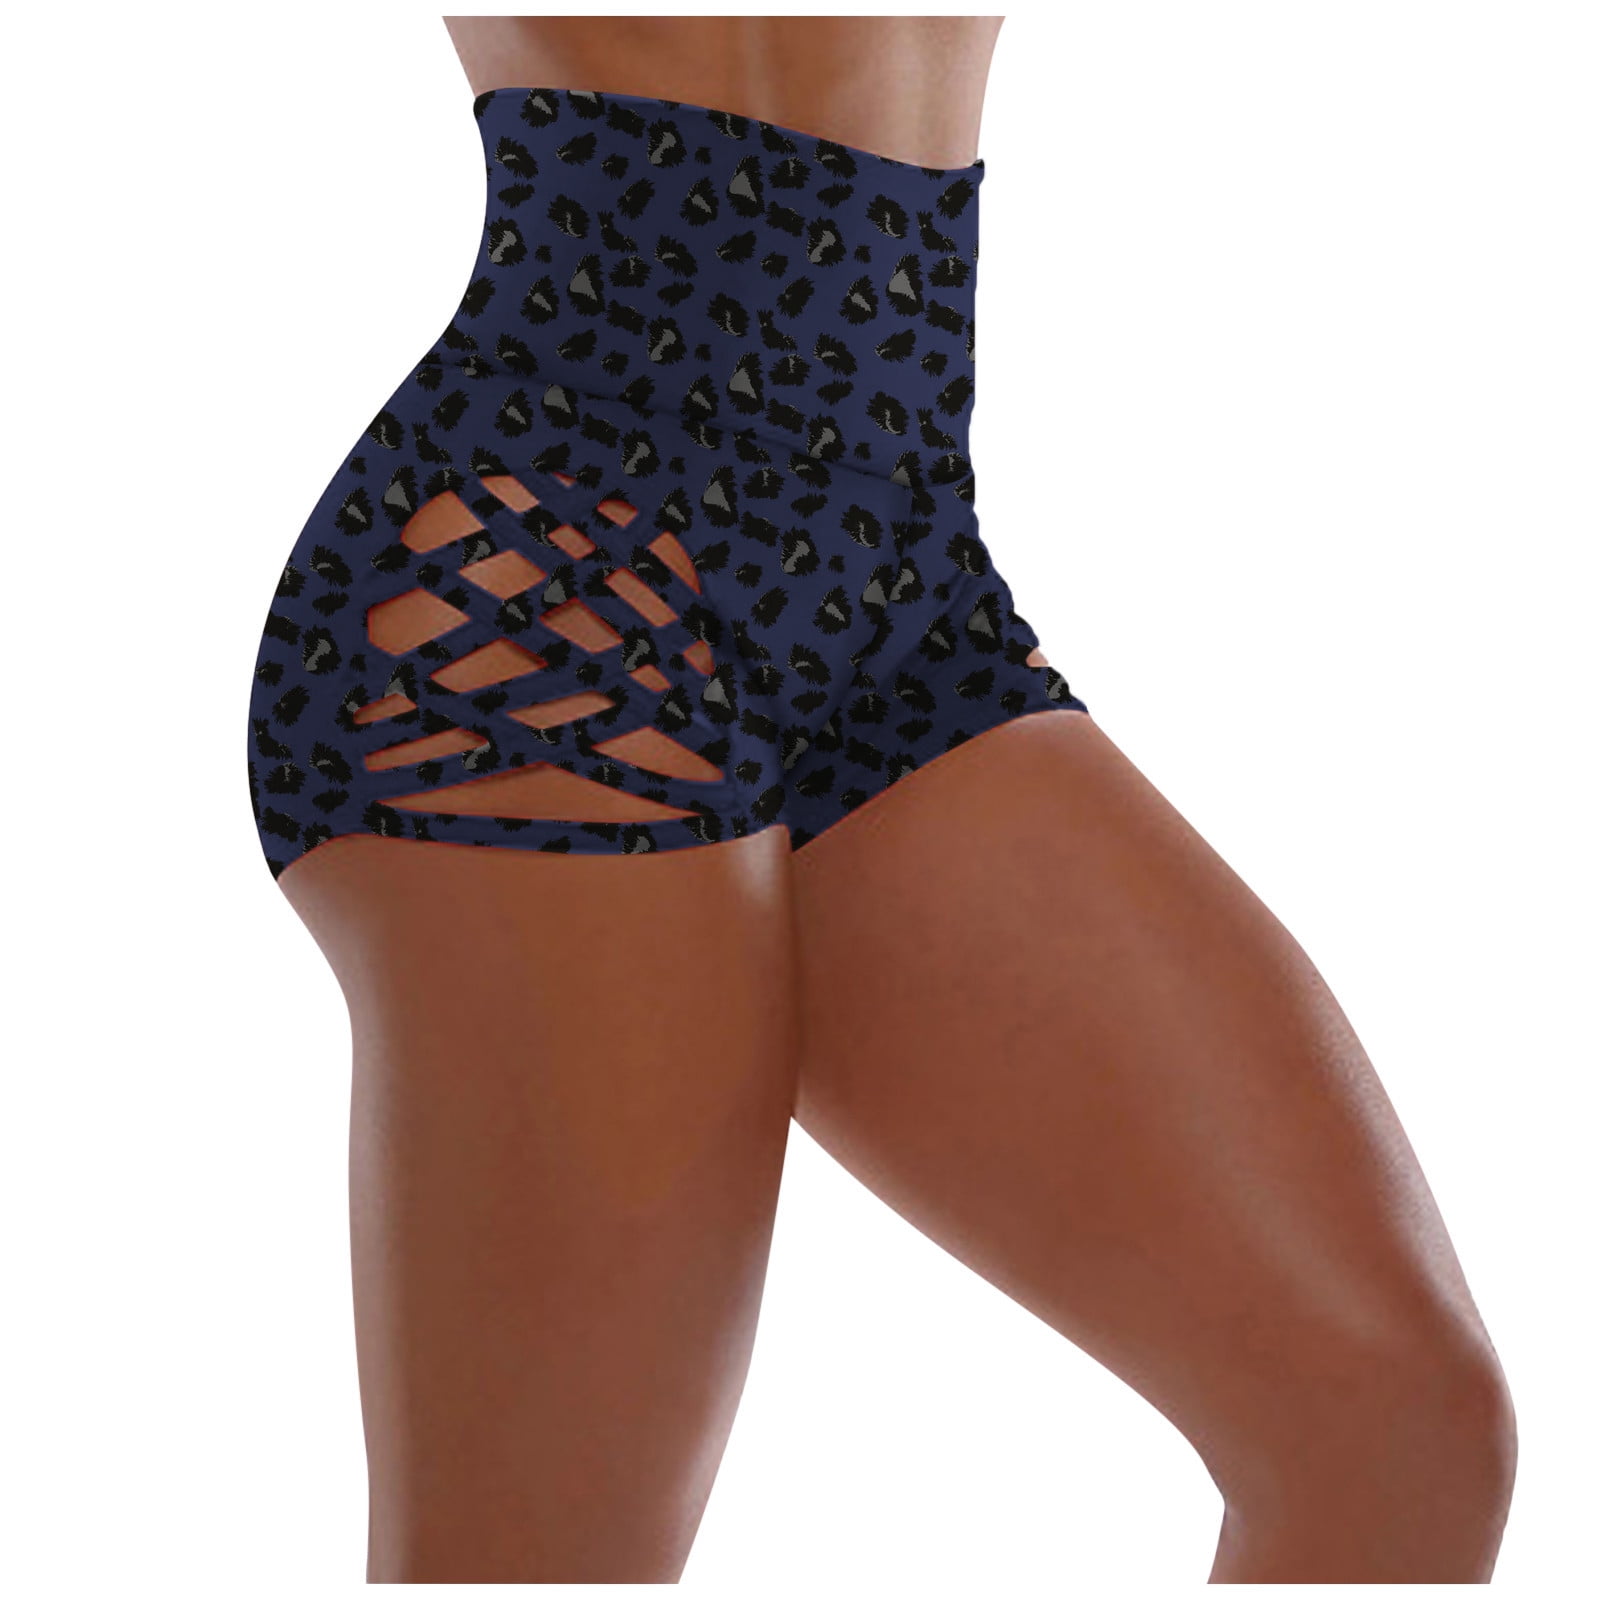 Dropship WILD High Waisted Shorts Seamless Outfits Women Workout Short  Leggings Zebra Leopard Joga Fitness Clothing Tights Gym Wear Nylon to Sell  Online at a Lower Price